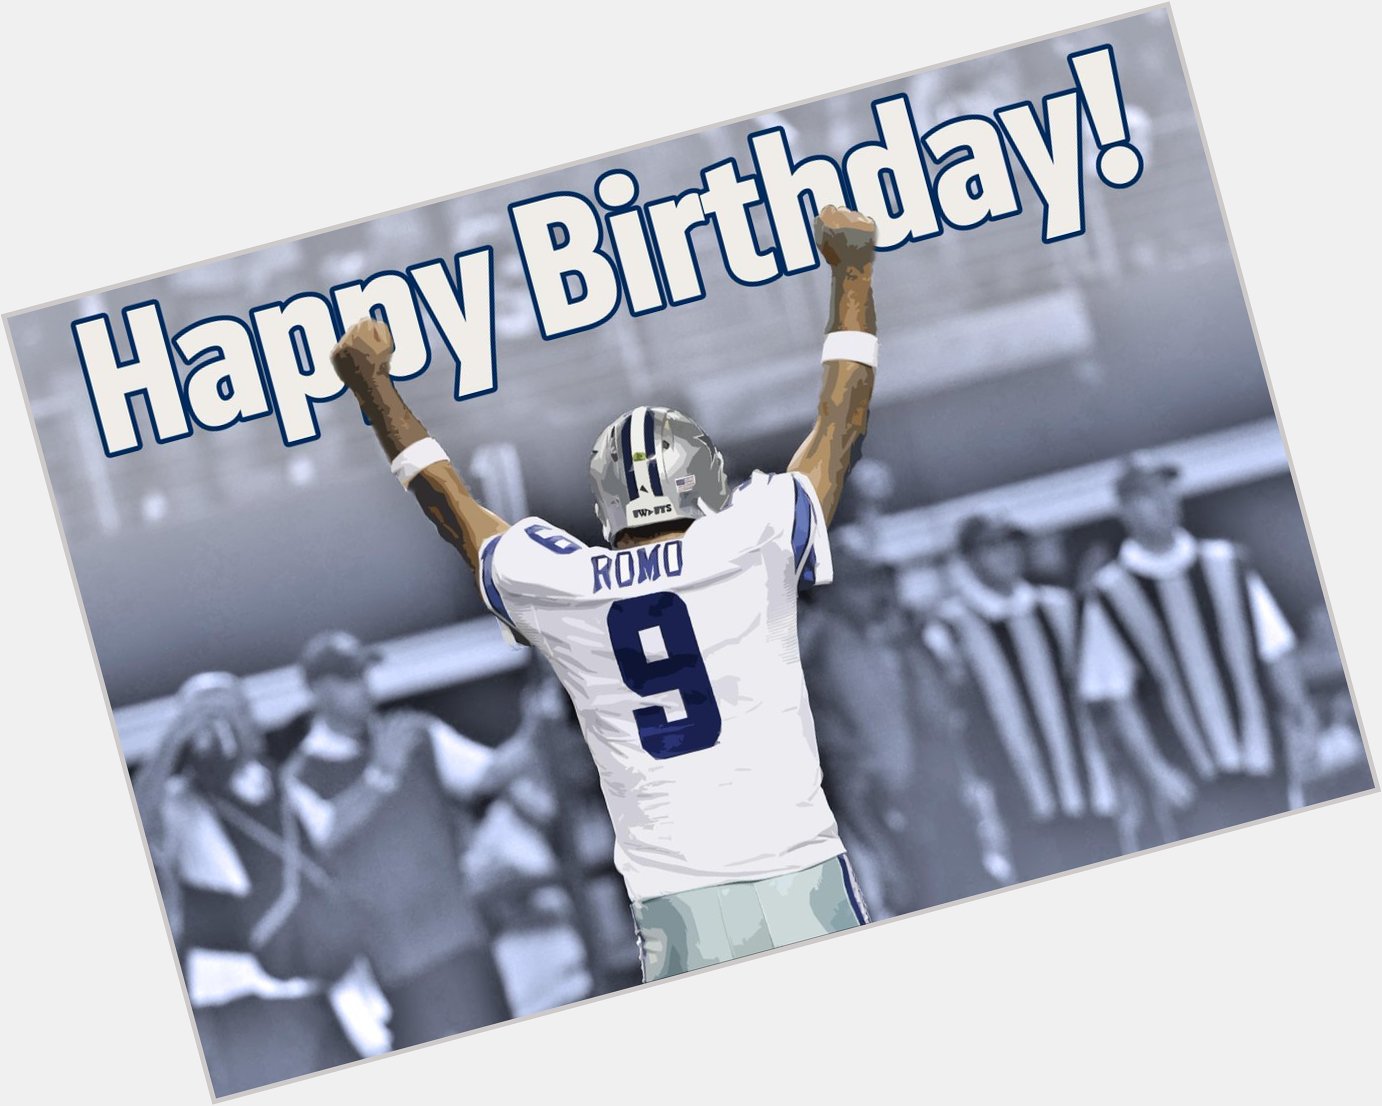 Happy 35th birthday to the all-time leader in passing YDs & TDs...

Tony ROMO!! 